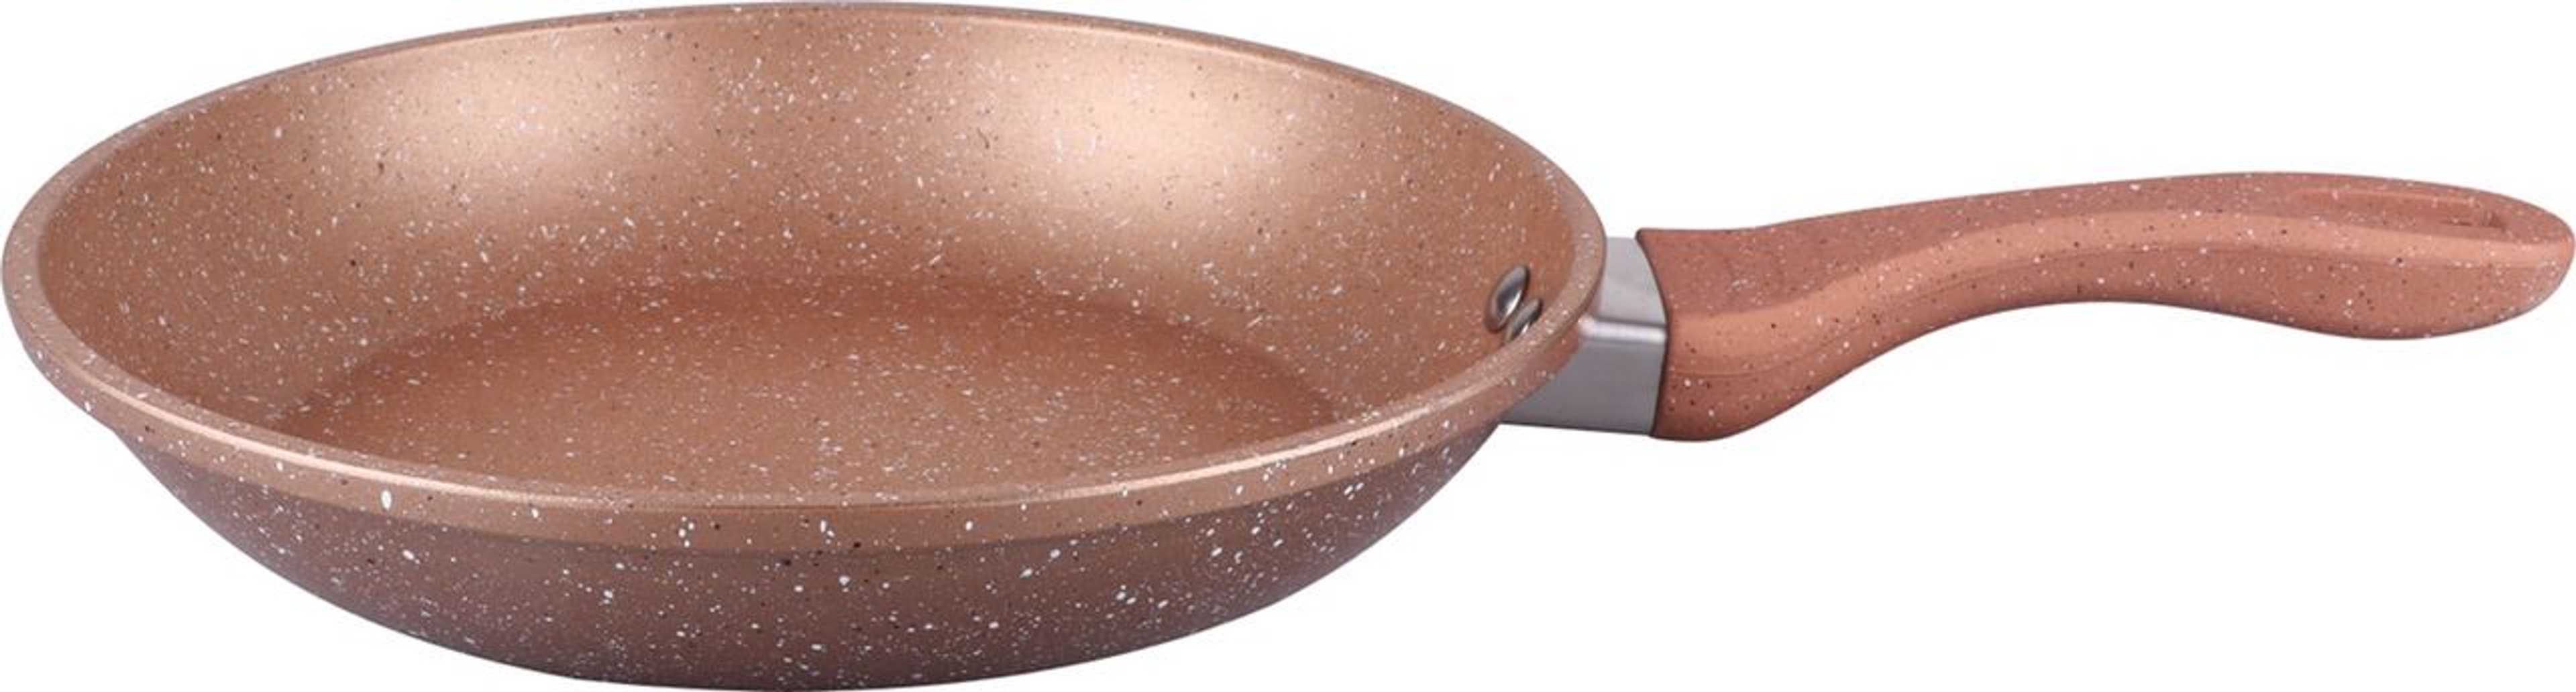 Dessini Granite Coating Fry Pan 22 Cm For Kitchen Best Quality In Use